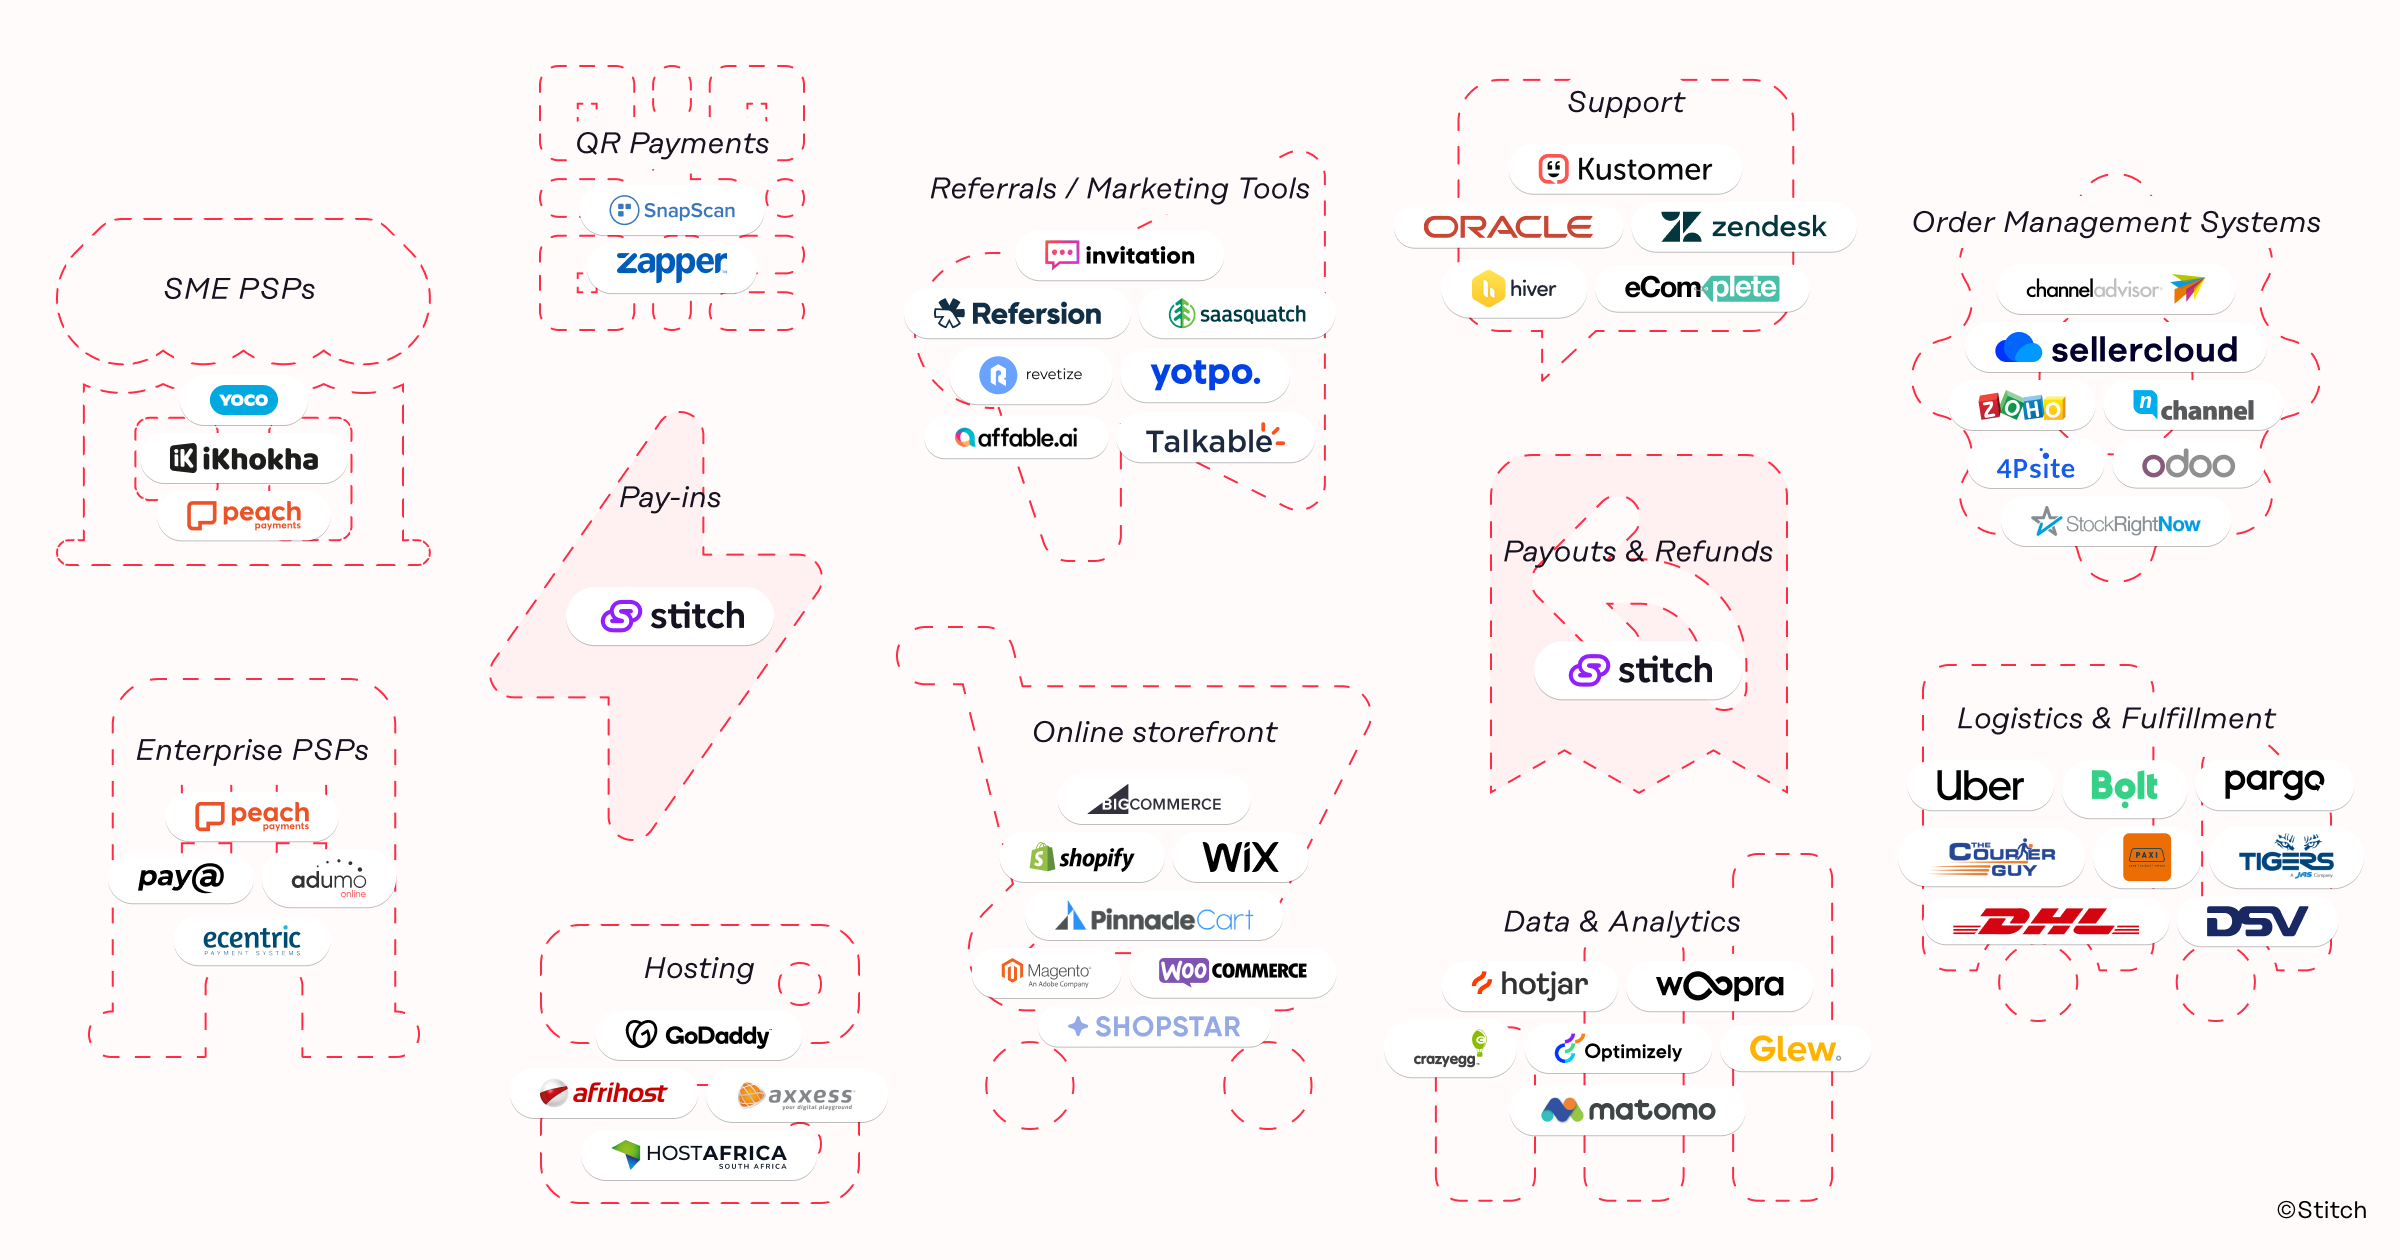 anatomy-of-an-ecom-techstack-sharing-v4@2x.png